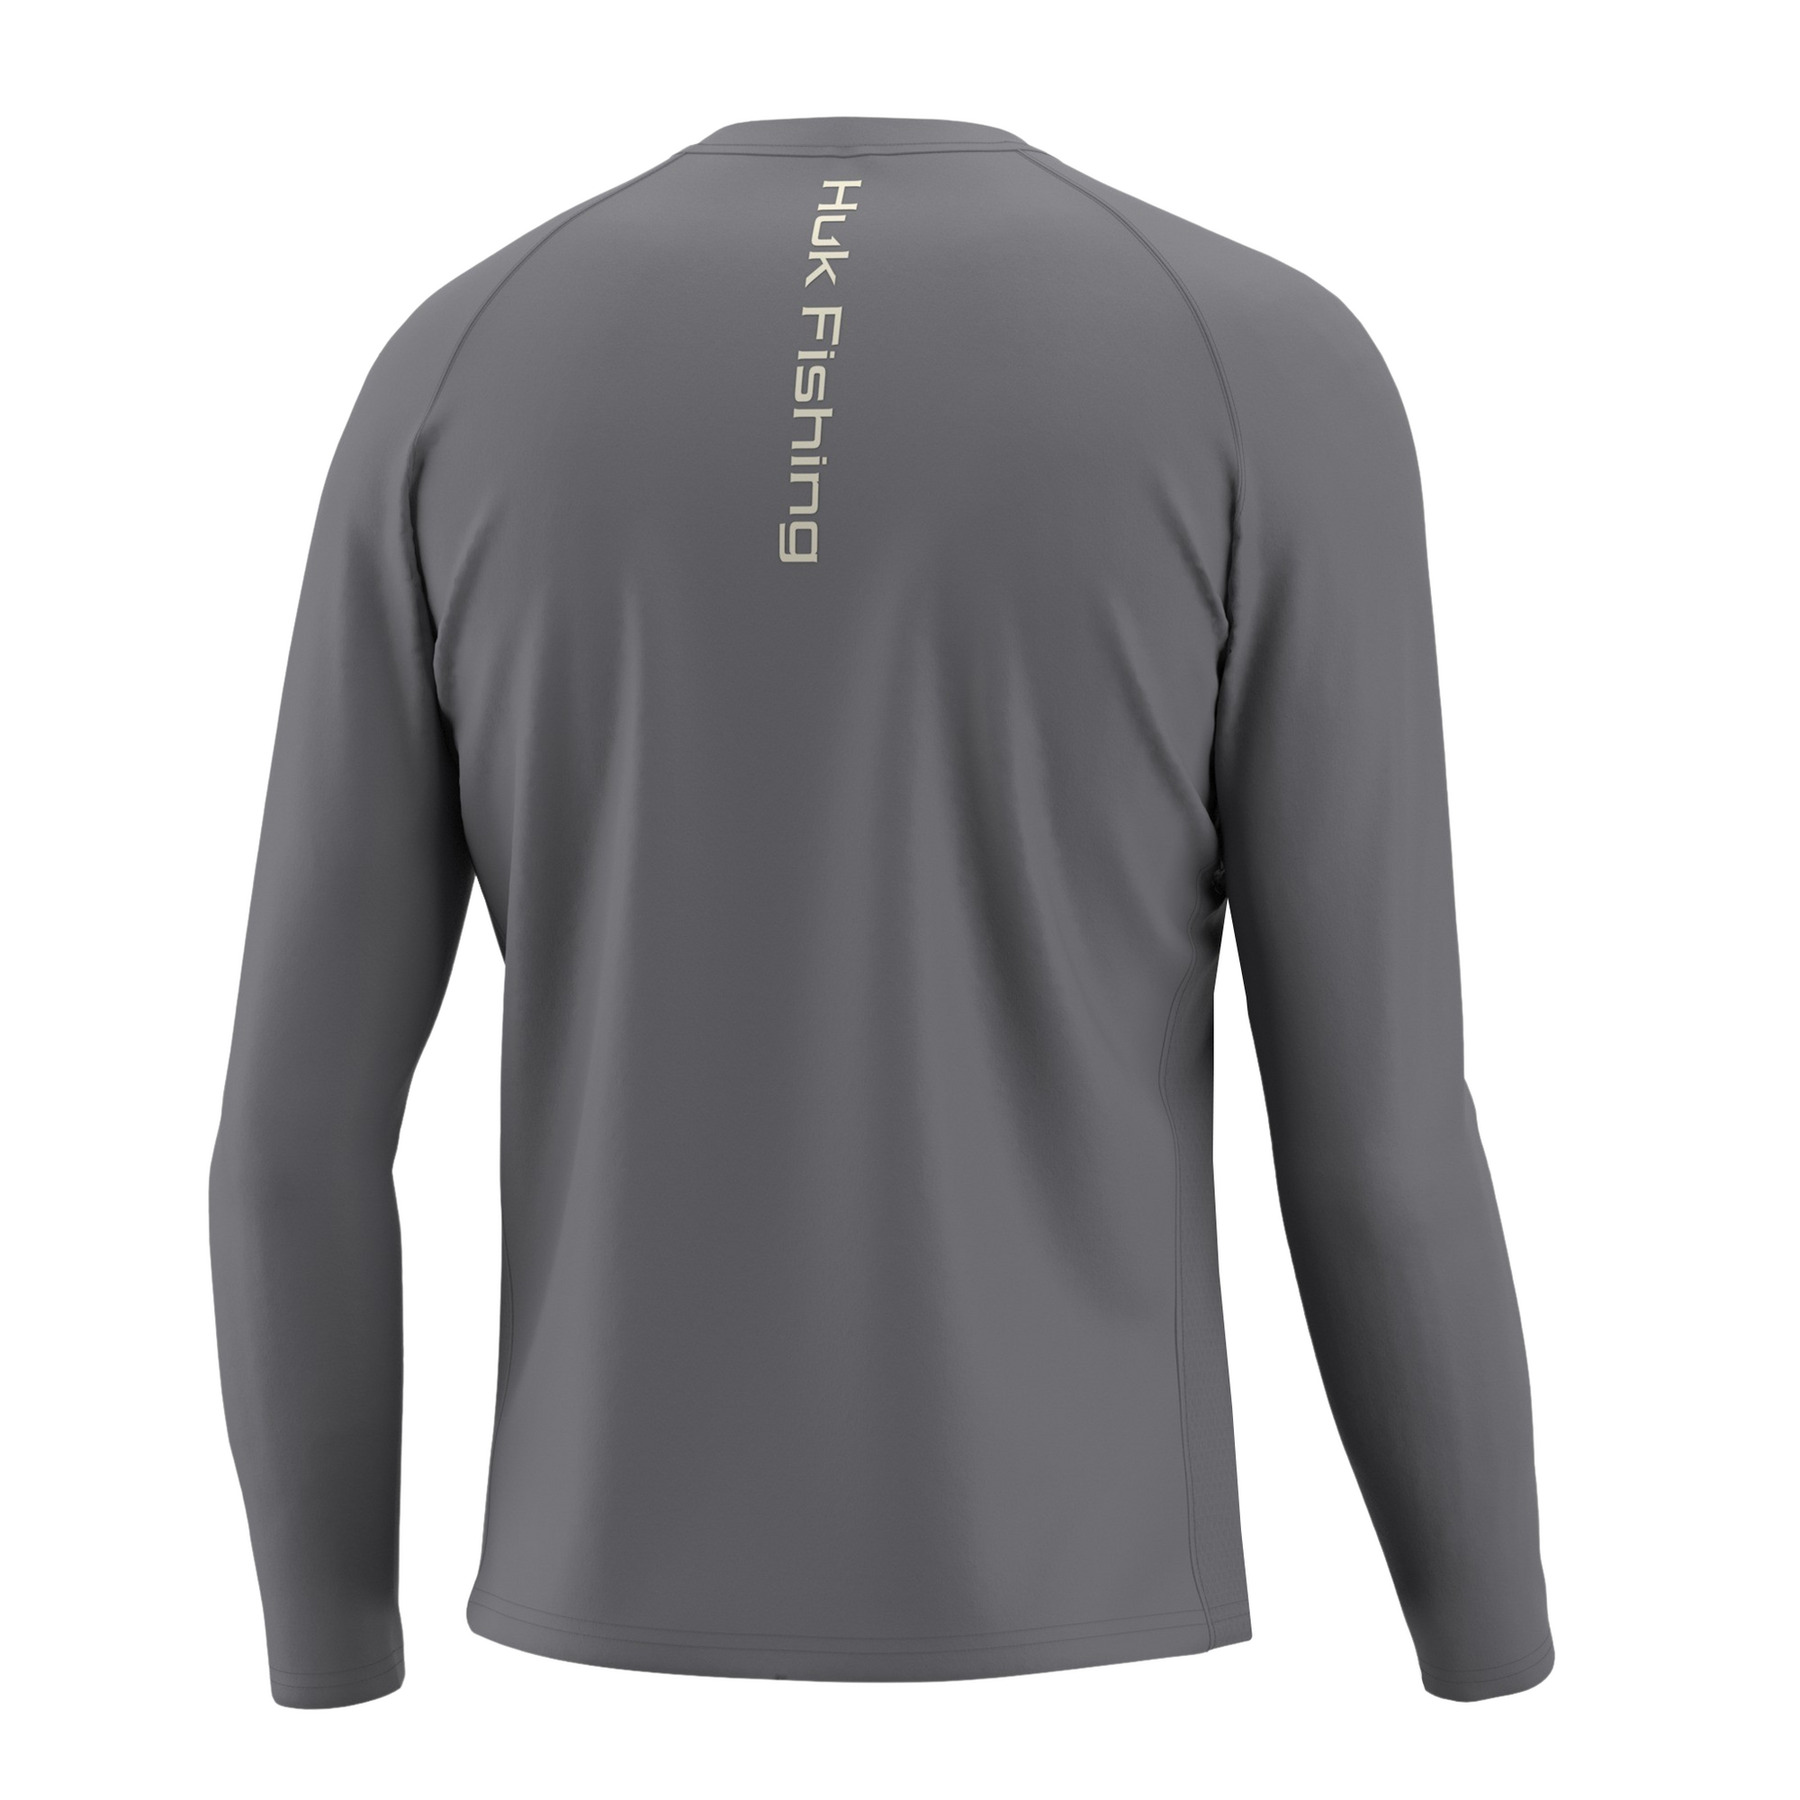 Huk Reflection Pursuit Long-Sleeve Shirt for Ladies in 2024